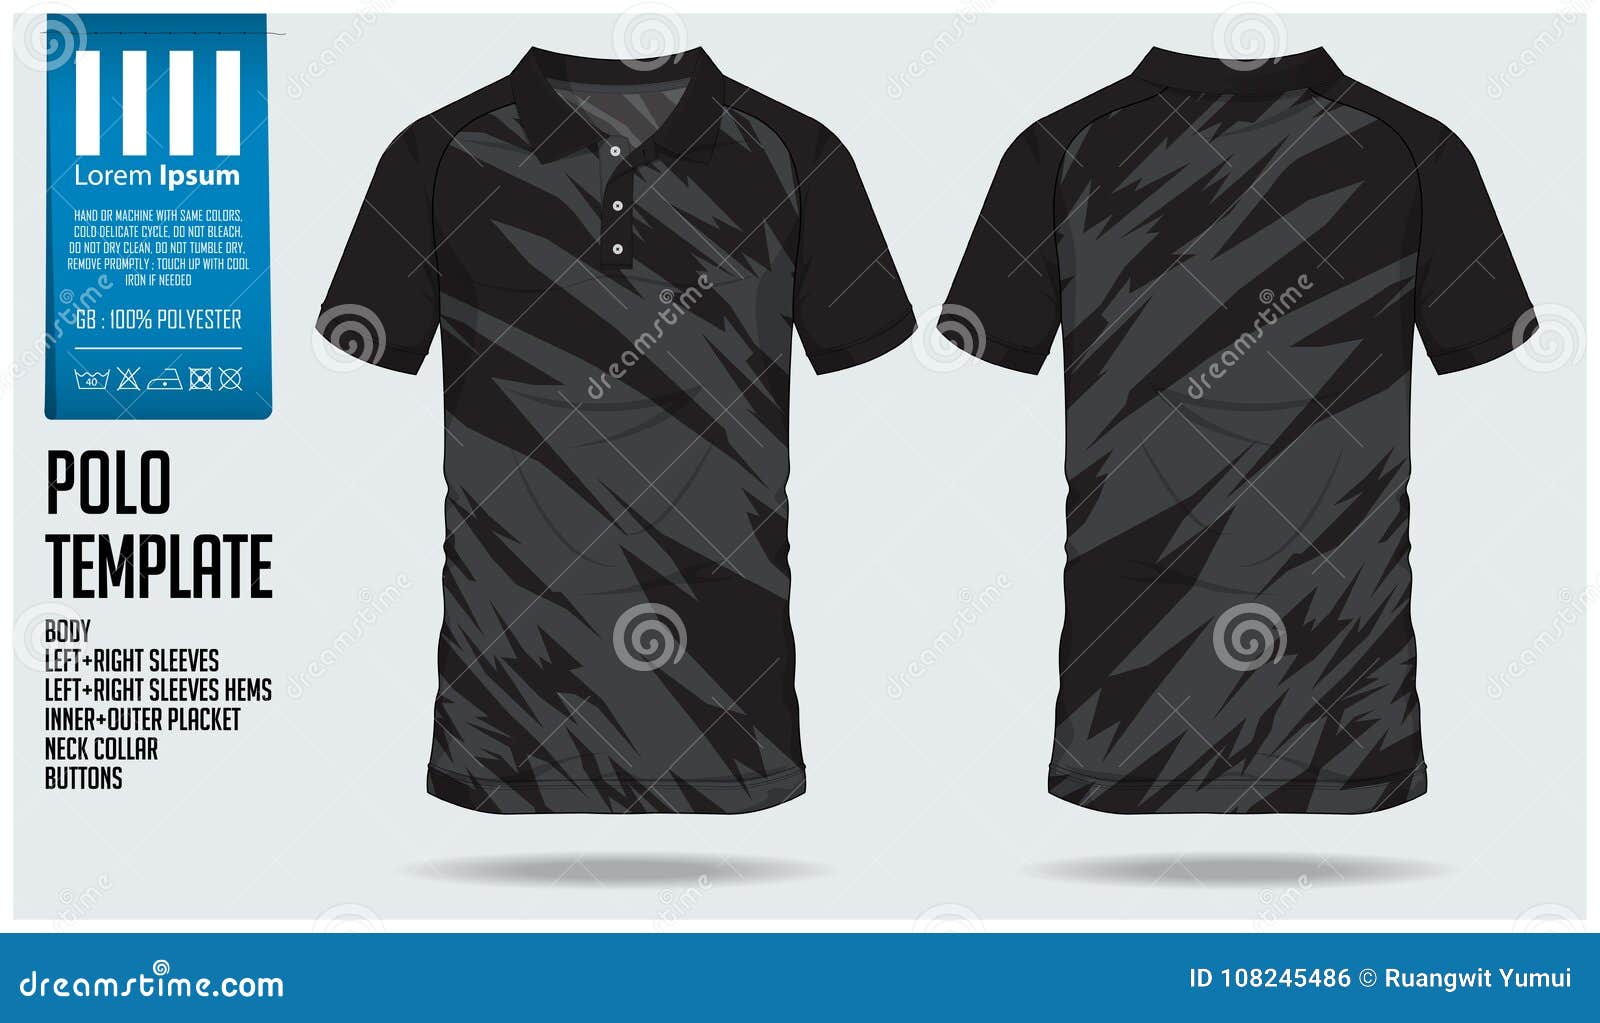 polo t shirt sport  template for soccer jersey, football kit or sport club. sport uniform in front view and back view.